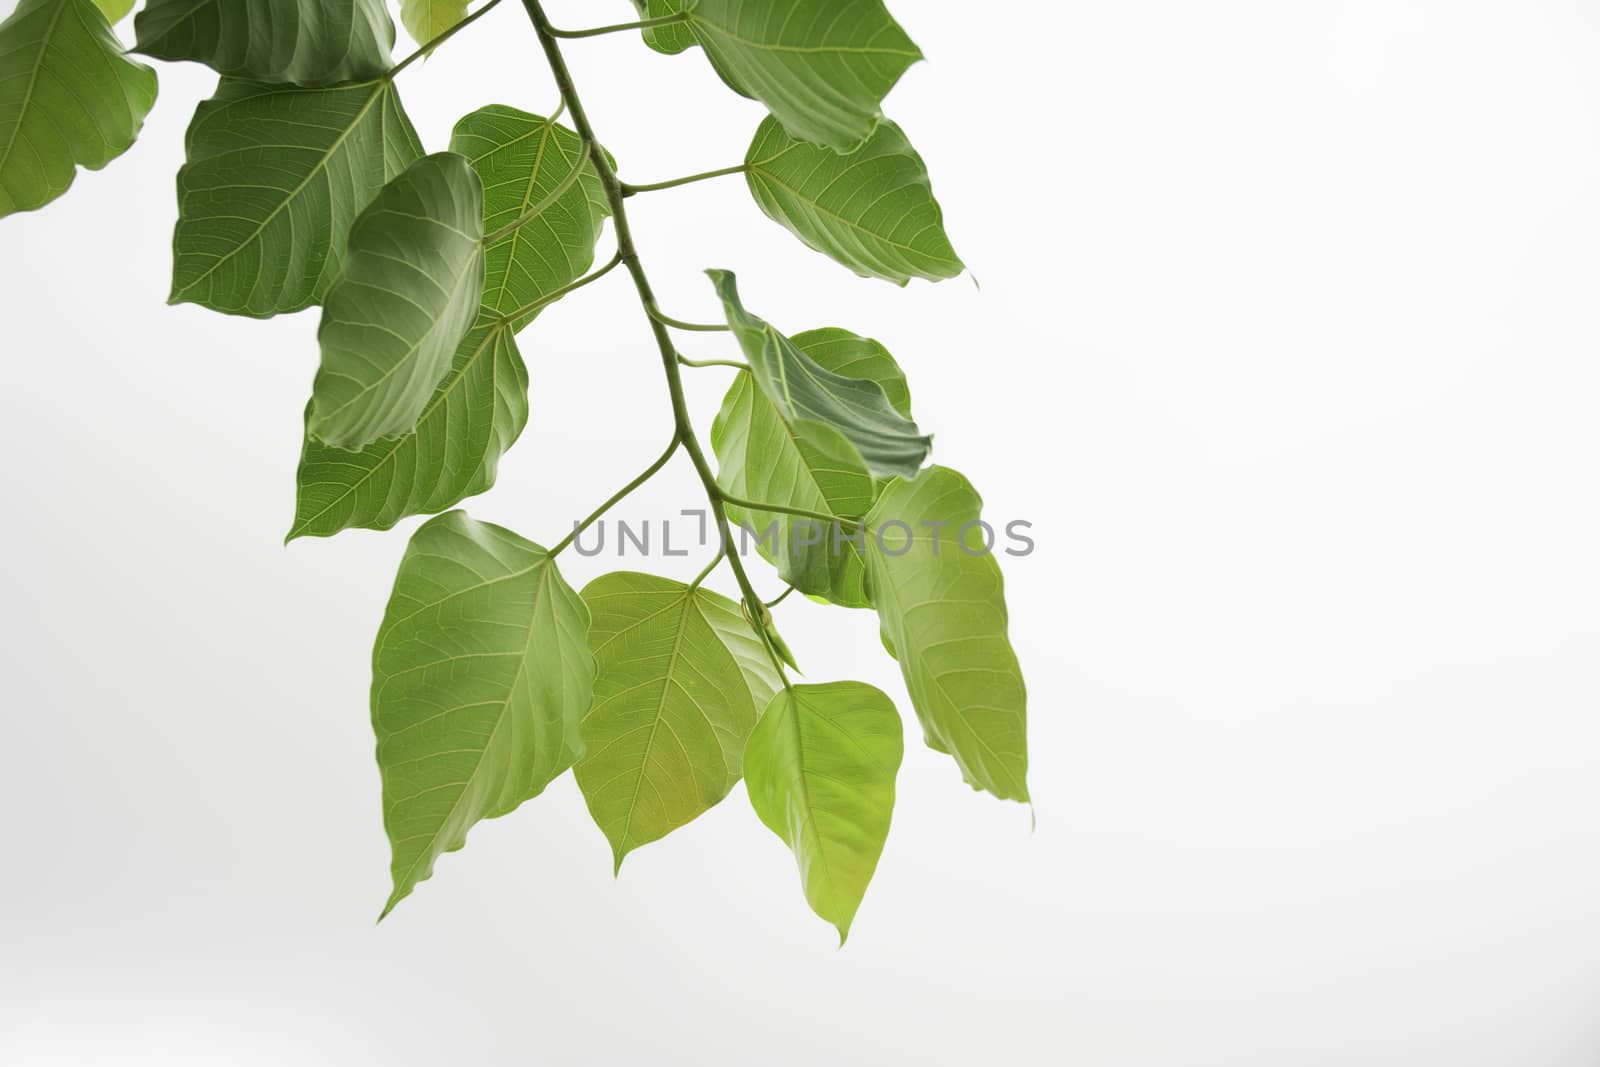 The green leave isolated on white background  by kirisa99